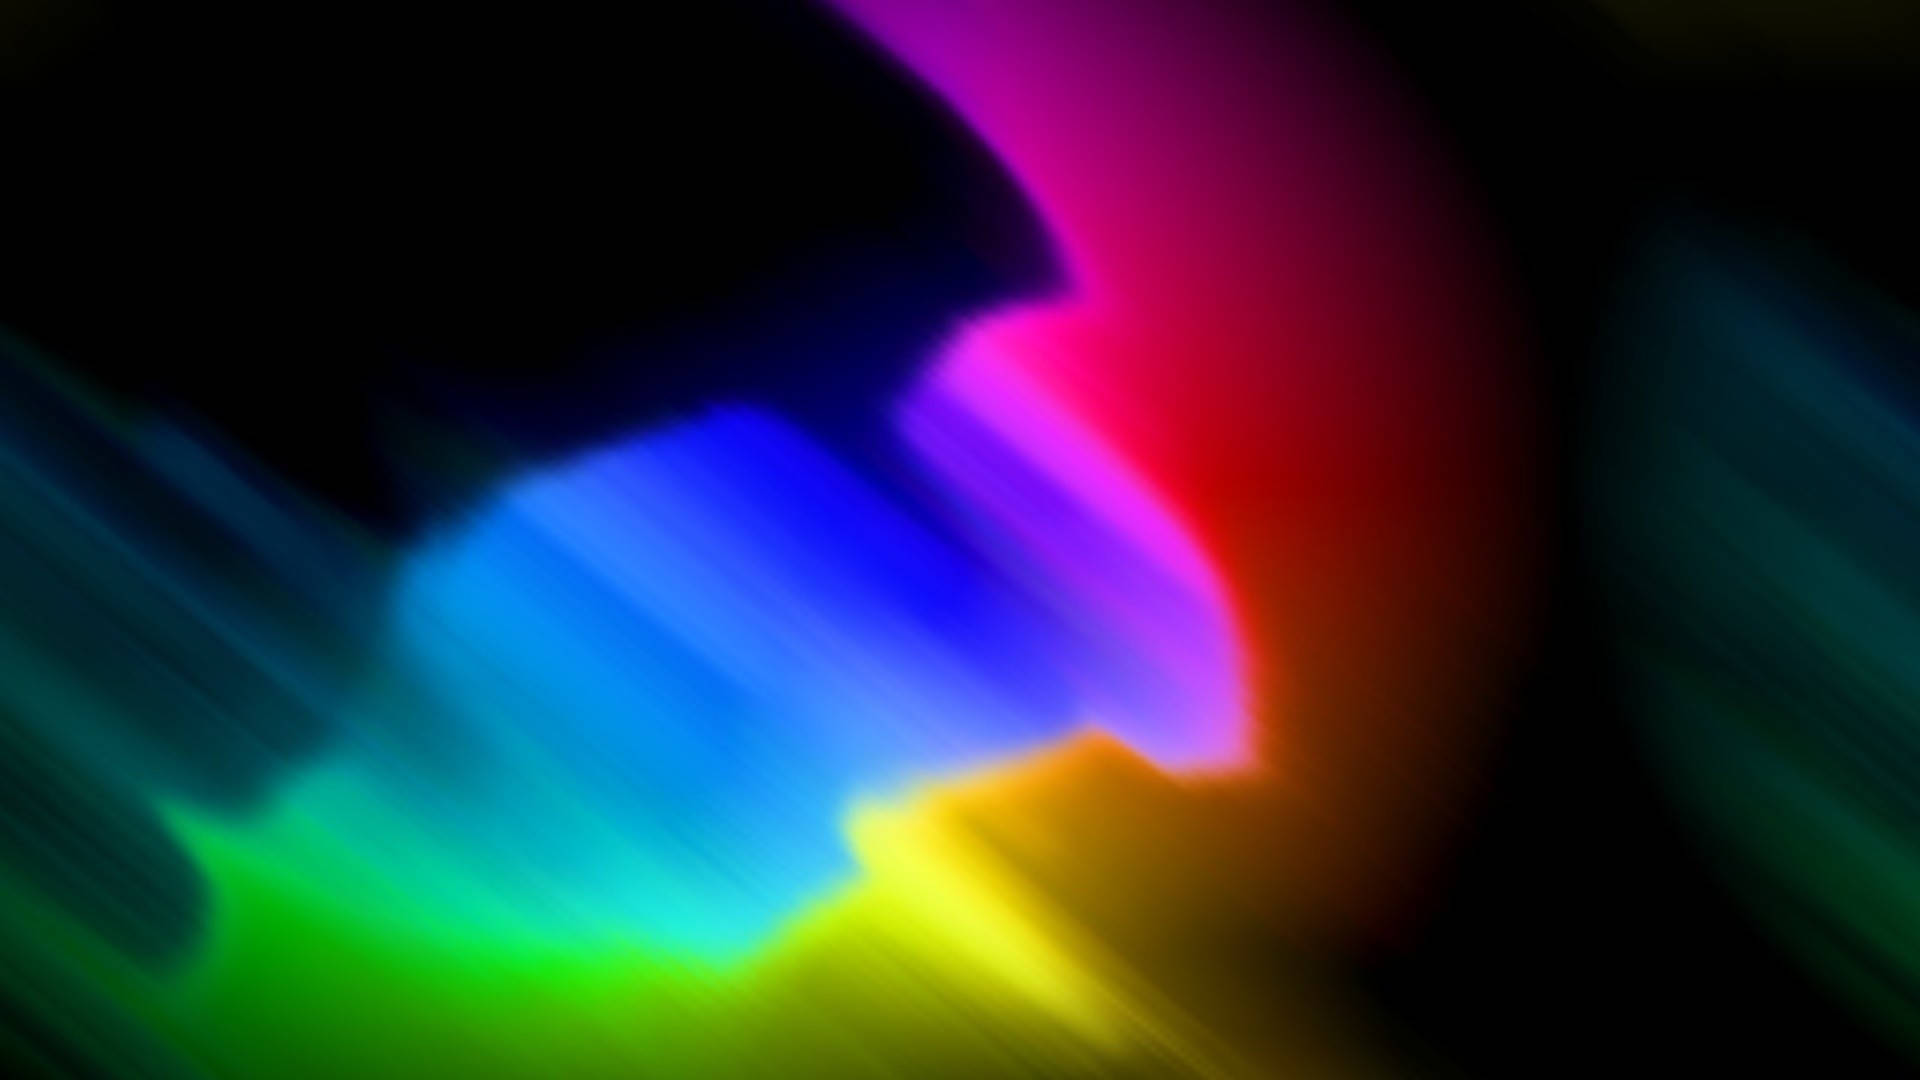 Amazing Hd Colorful Blurred Lights Background